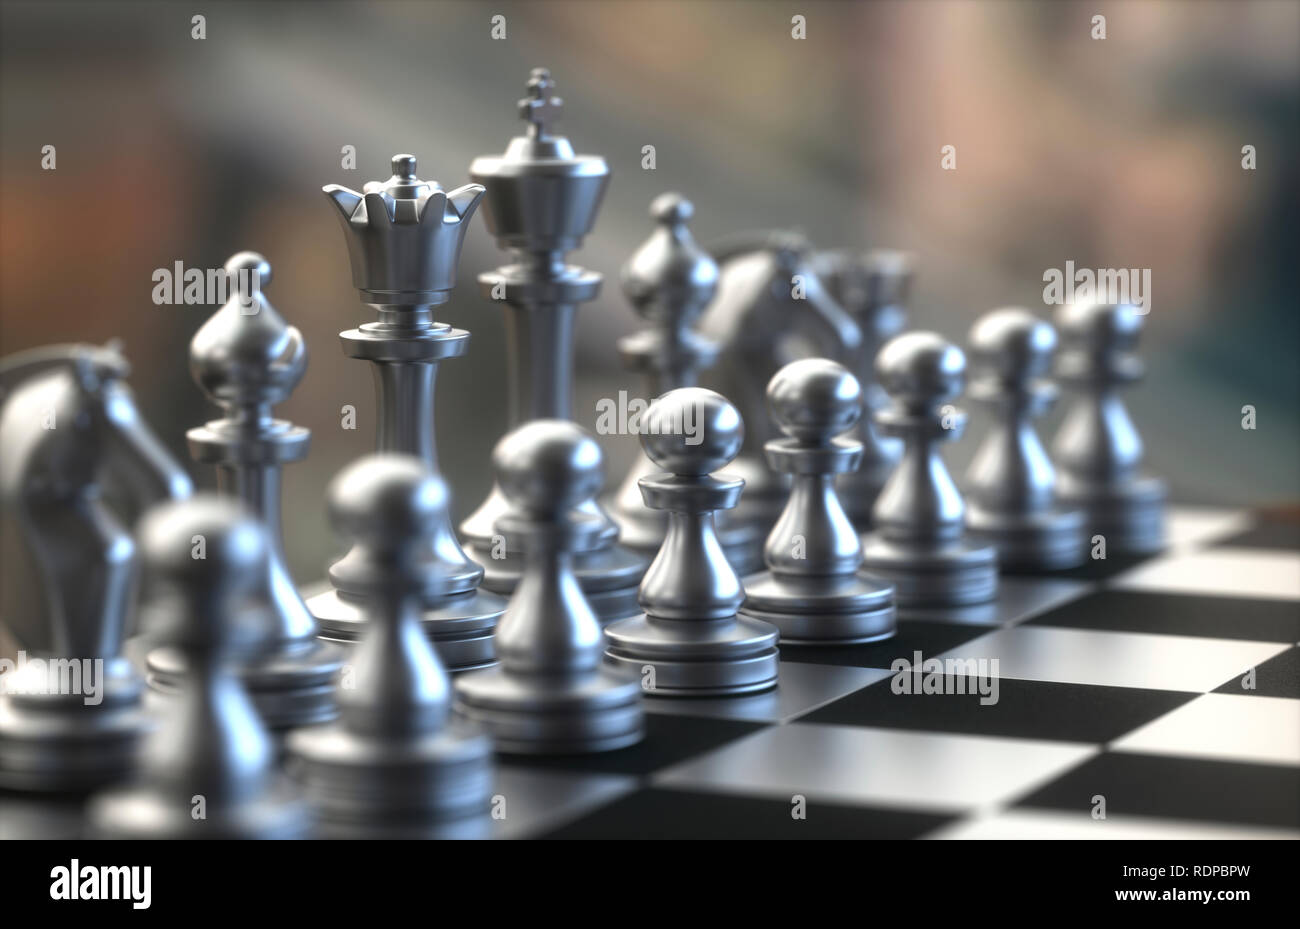 Chess pieces on a board, illustration. Stock Photo